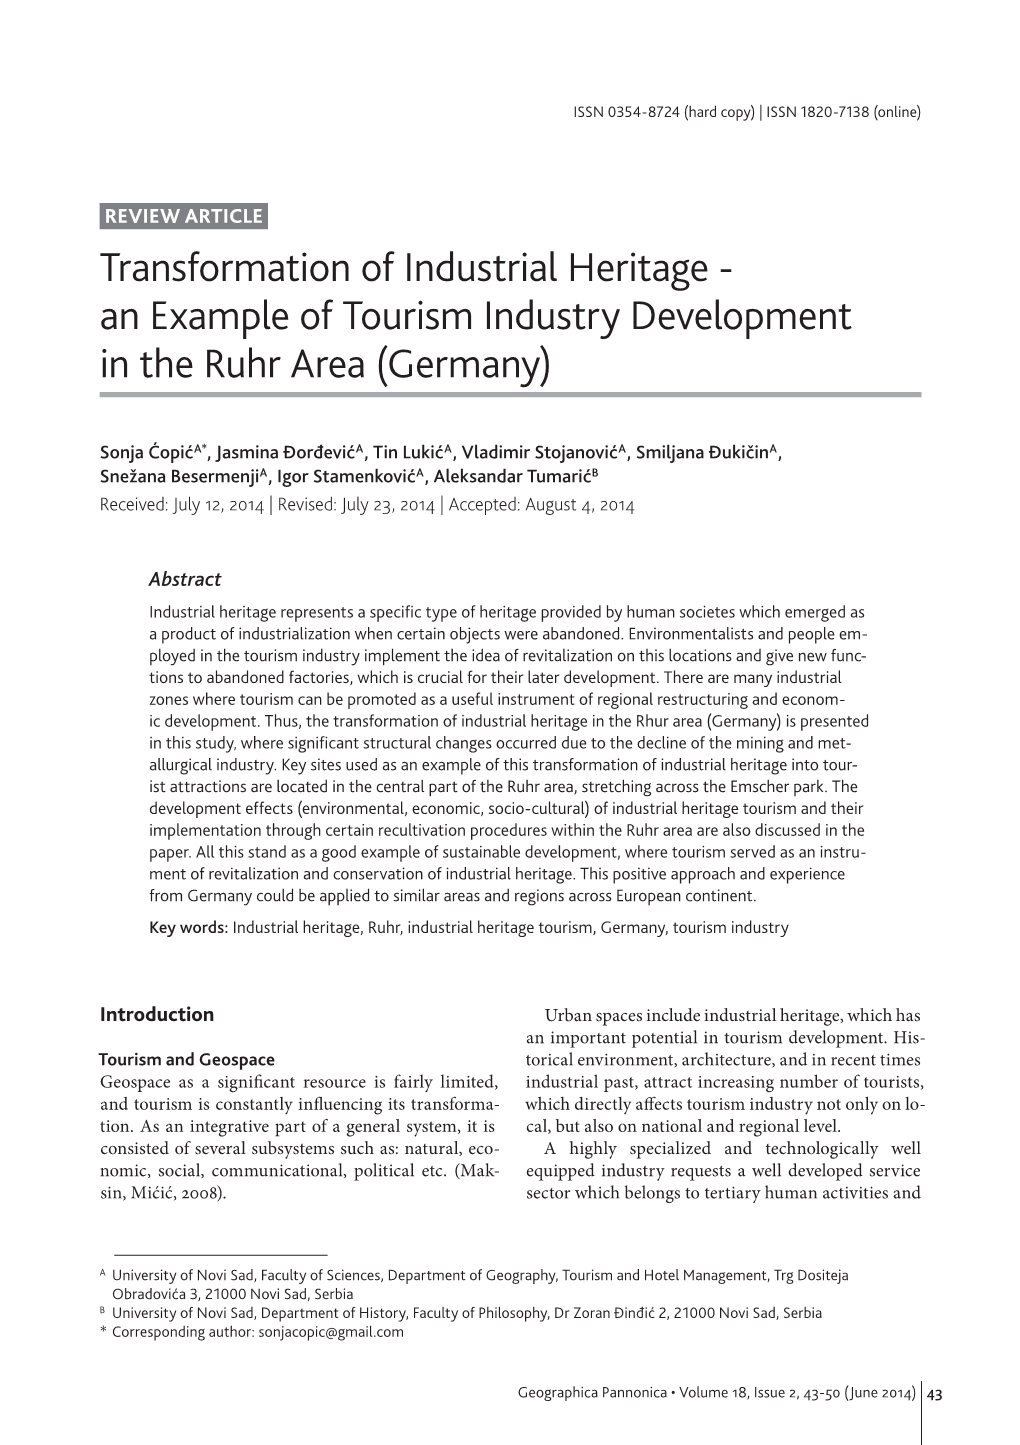 Transformation of Industrial Heritage - an Example of Tourism Industry Development in the Ruhr Area (Germany)